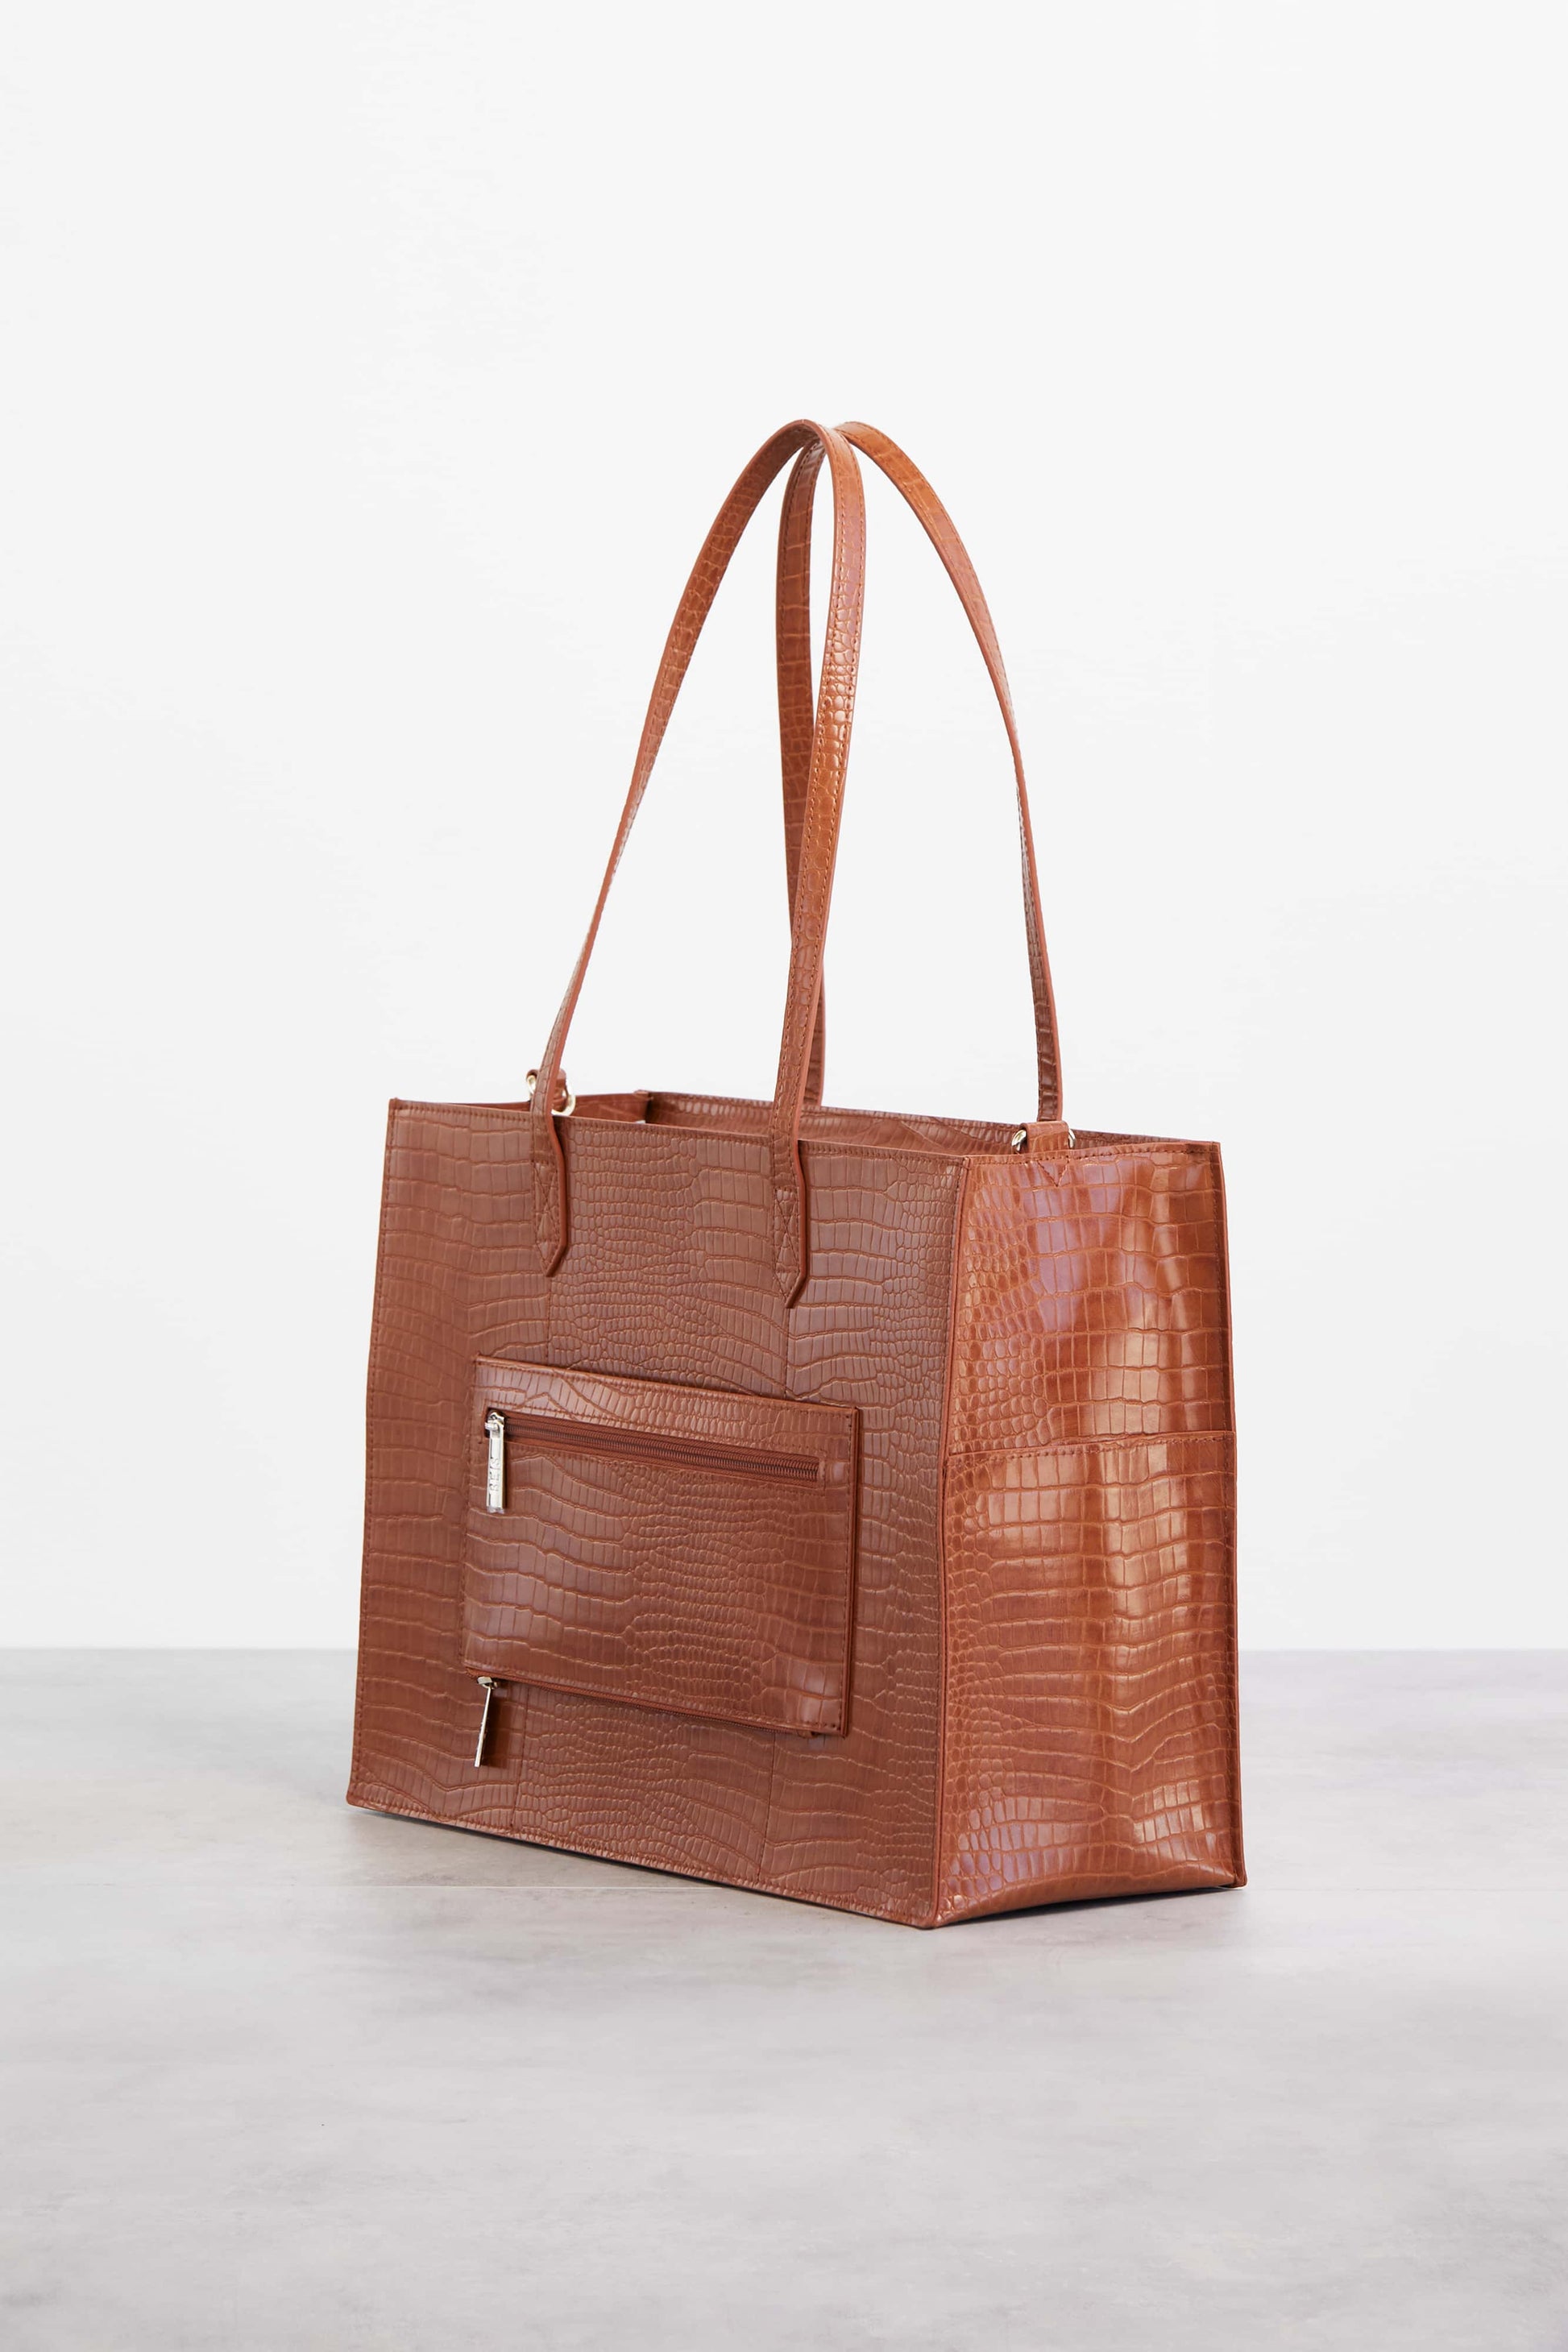 Franklin Covey Tan Leather Tote Work Bag Purse